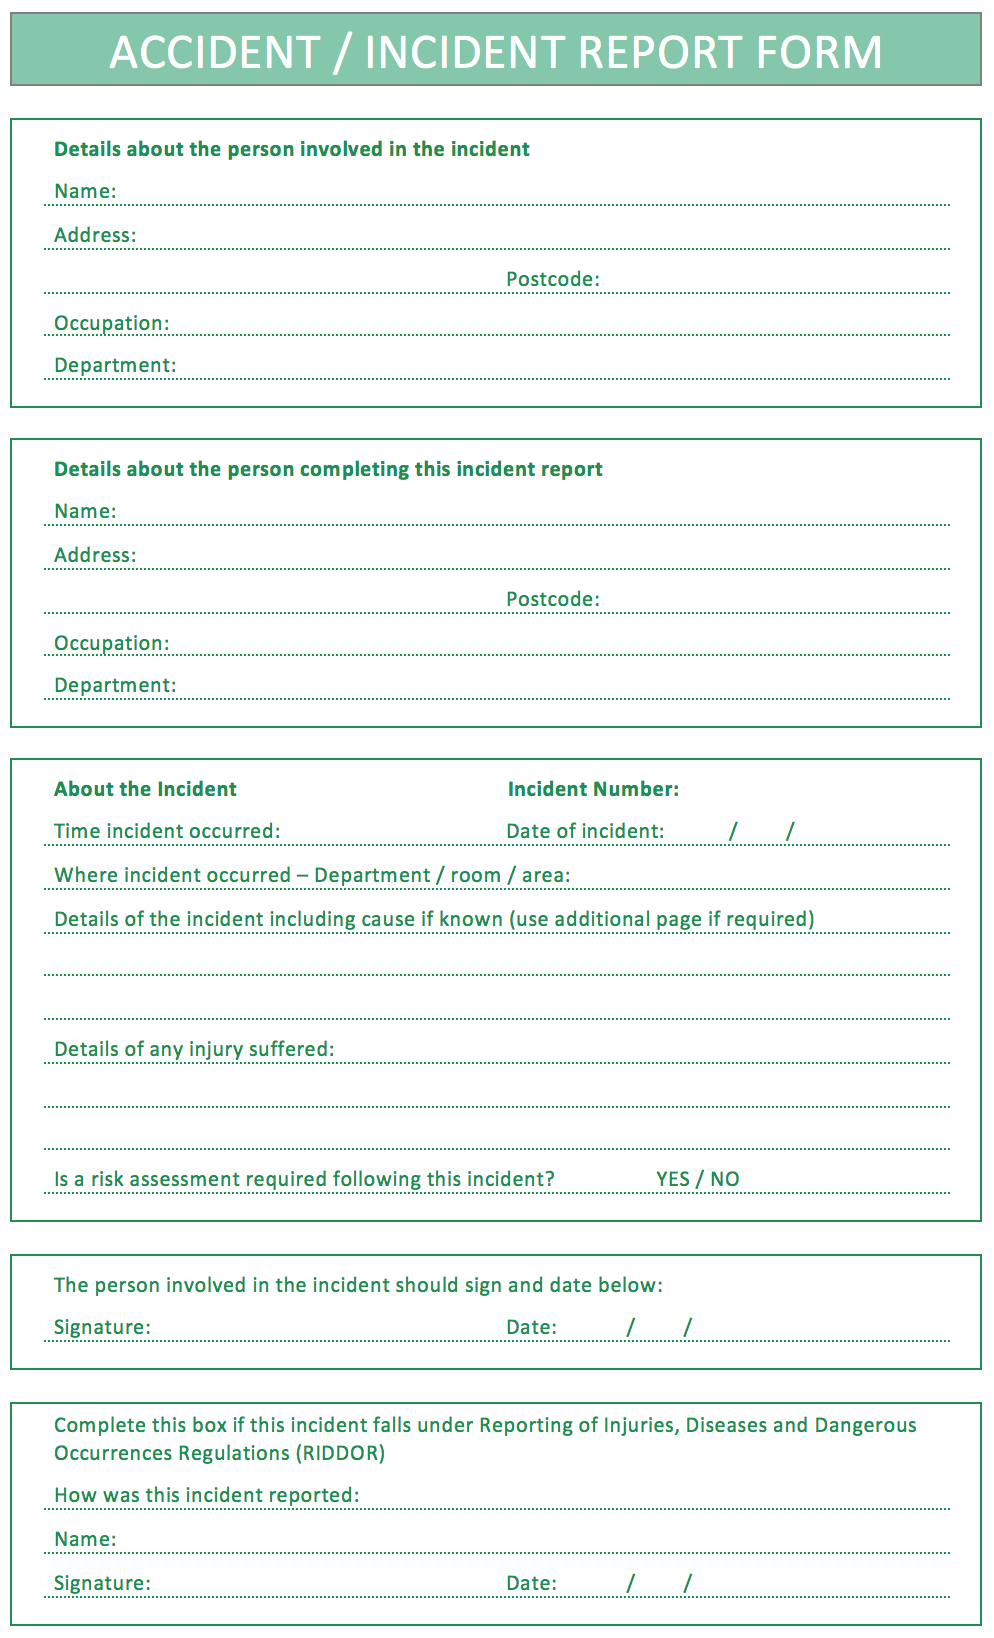 What Is Riddor – A Short Introduction | Intrafocus For Accident Report Form Template Uk